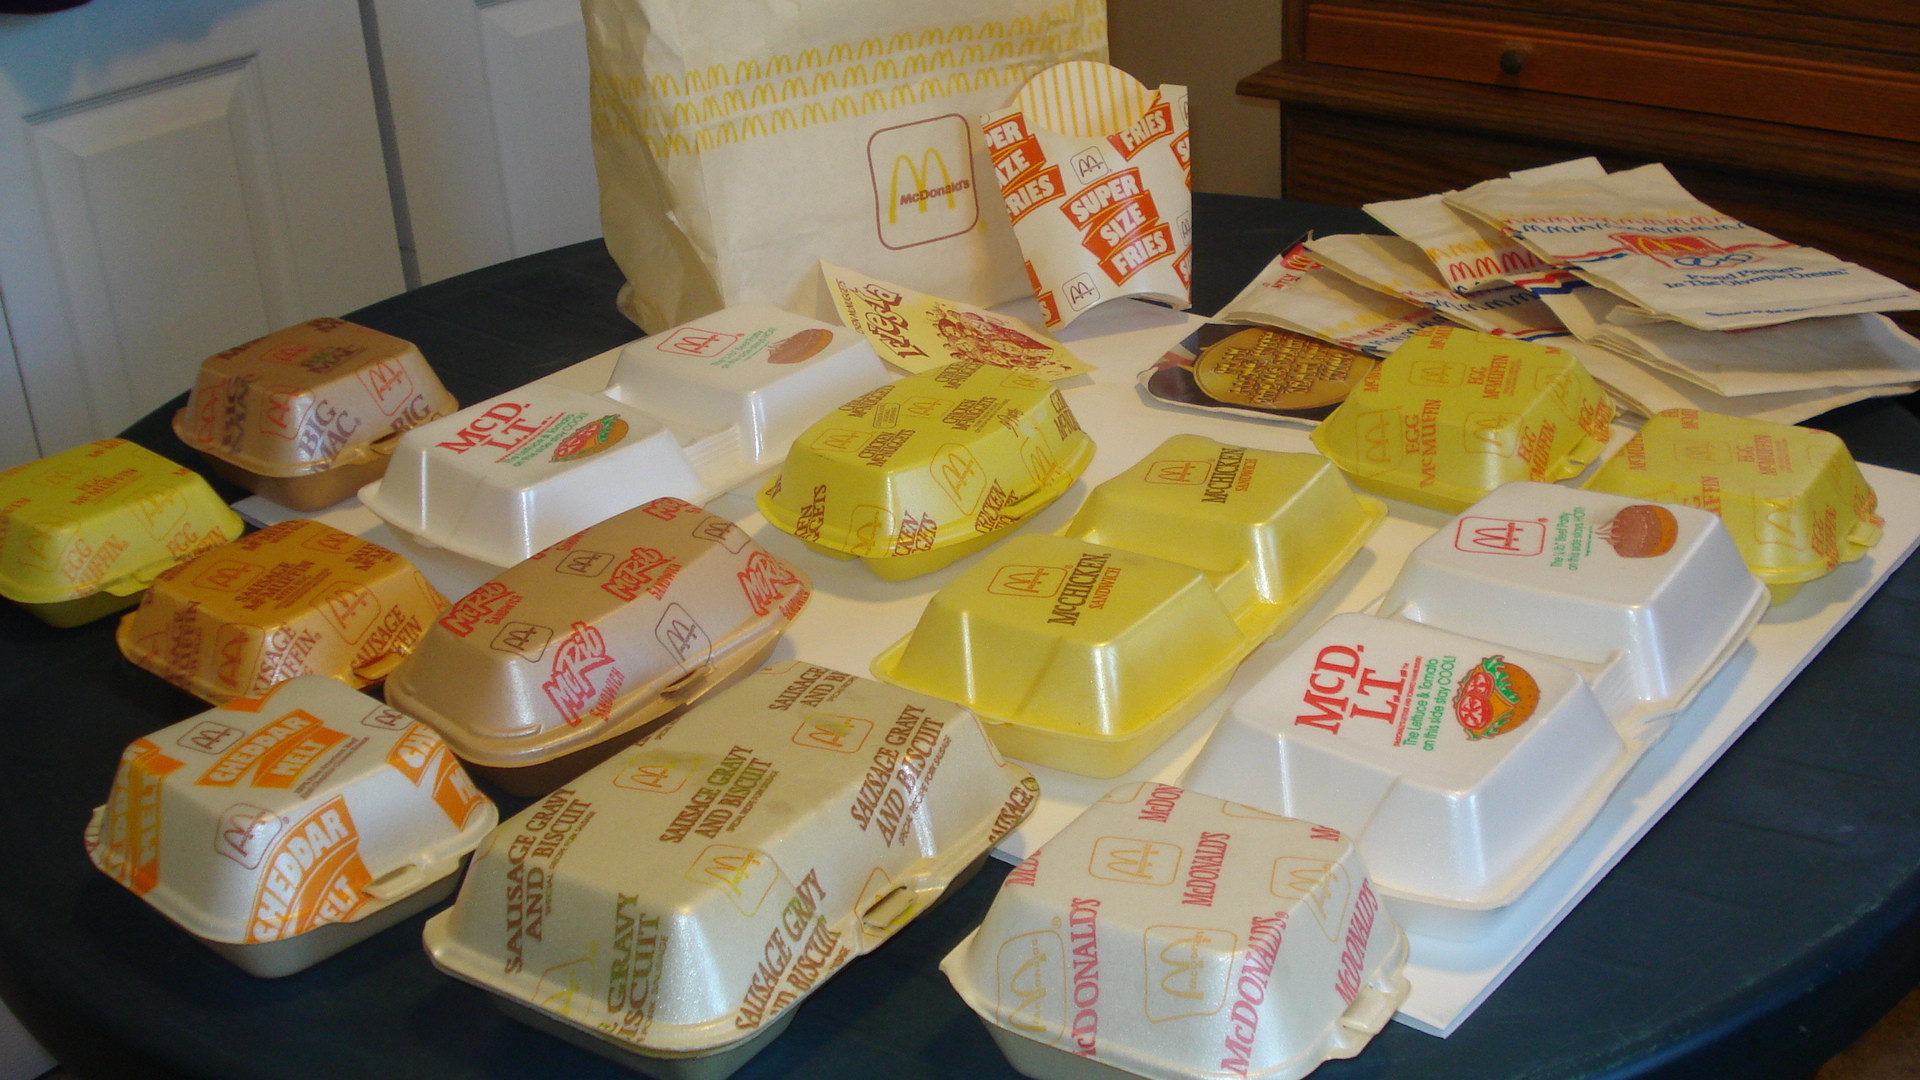 REmember when fast food was wrapped like this?